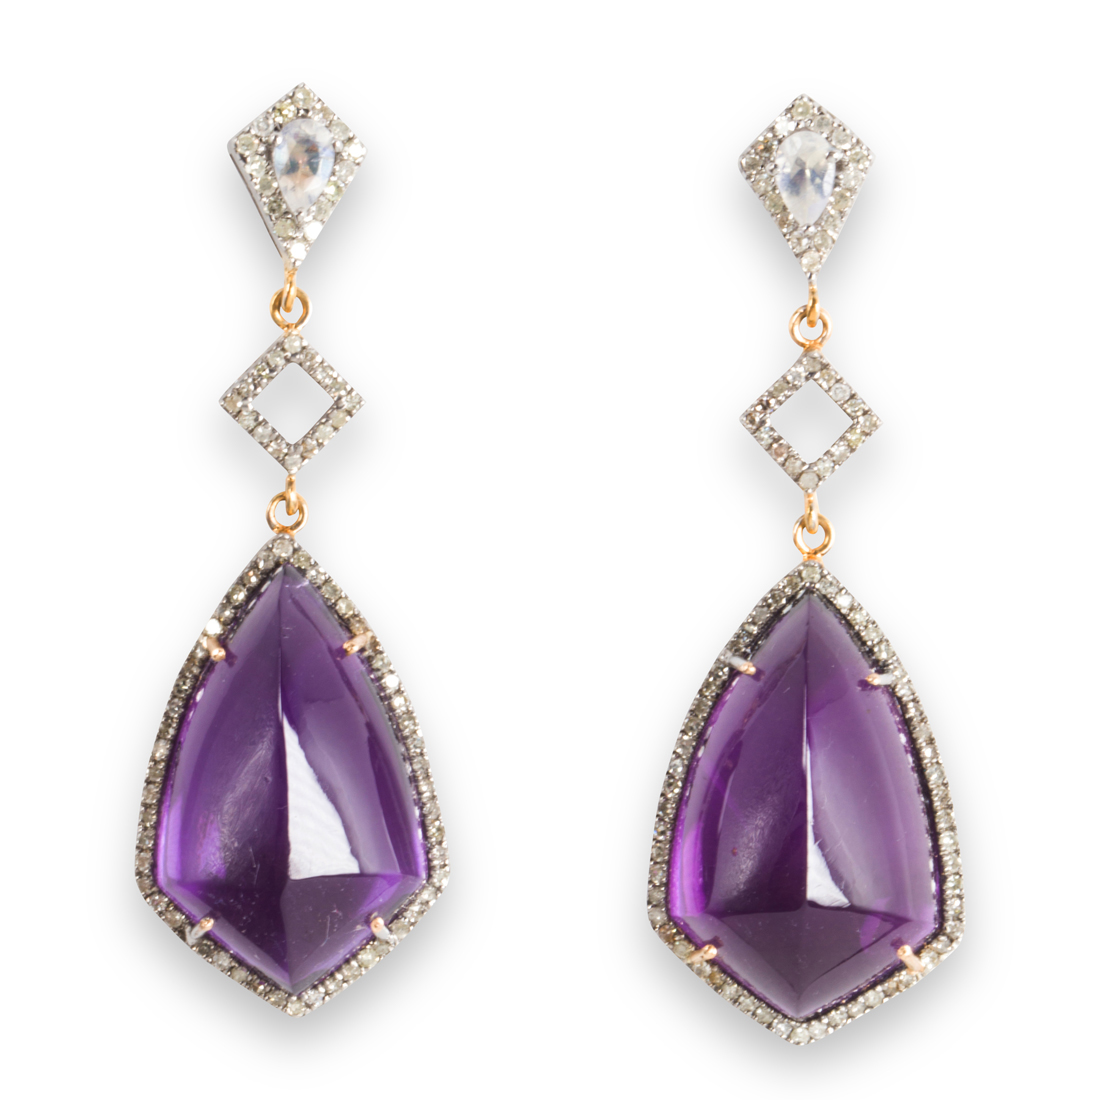 A PAIR OF AMETHYST MOONSTONE AND 3a1f83